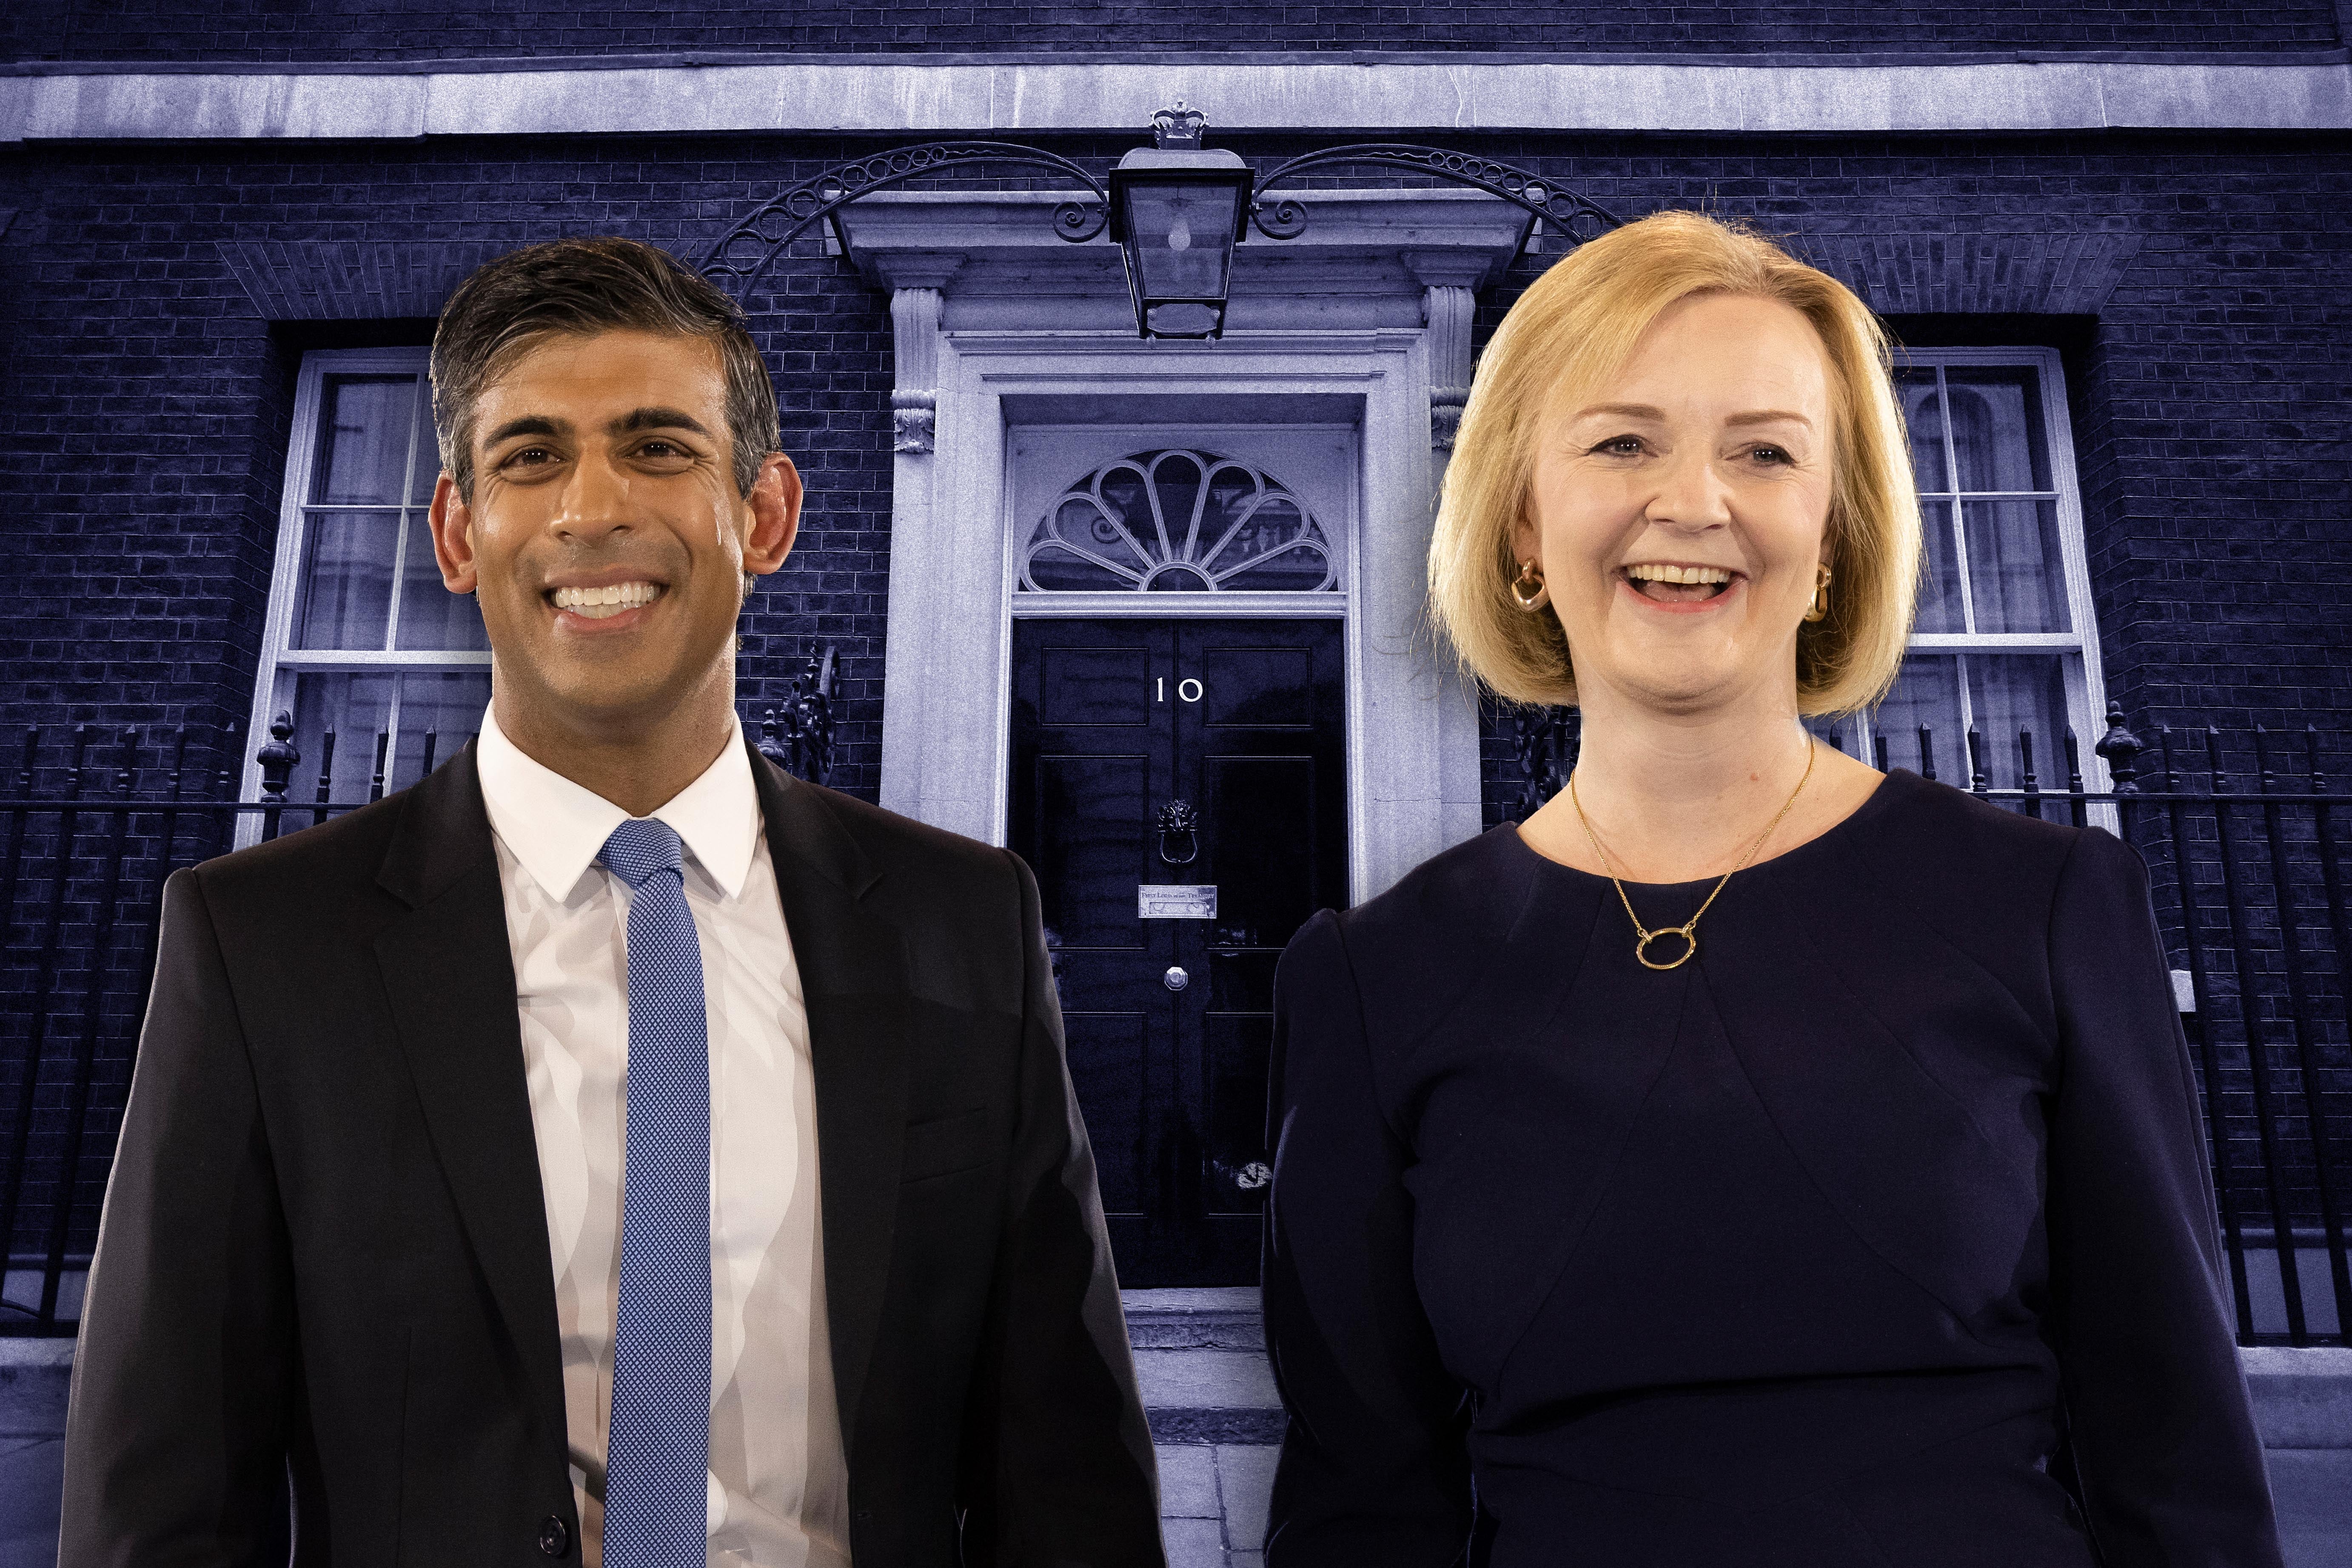 Stuck around 24 points in the polls, Rishi Sunak’s party is struggling to escape the adverse political consequences of Liz Truss’s brief tenure in Downing Street